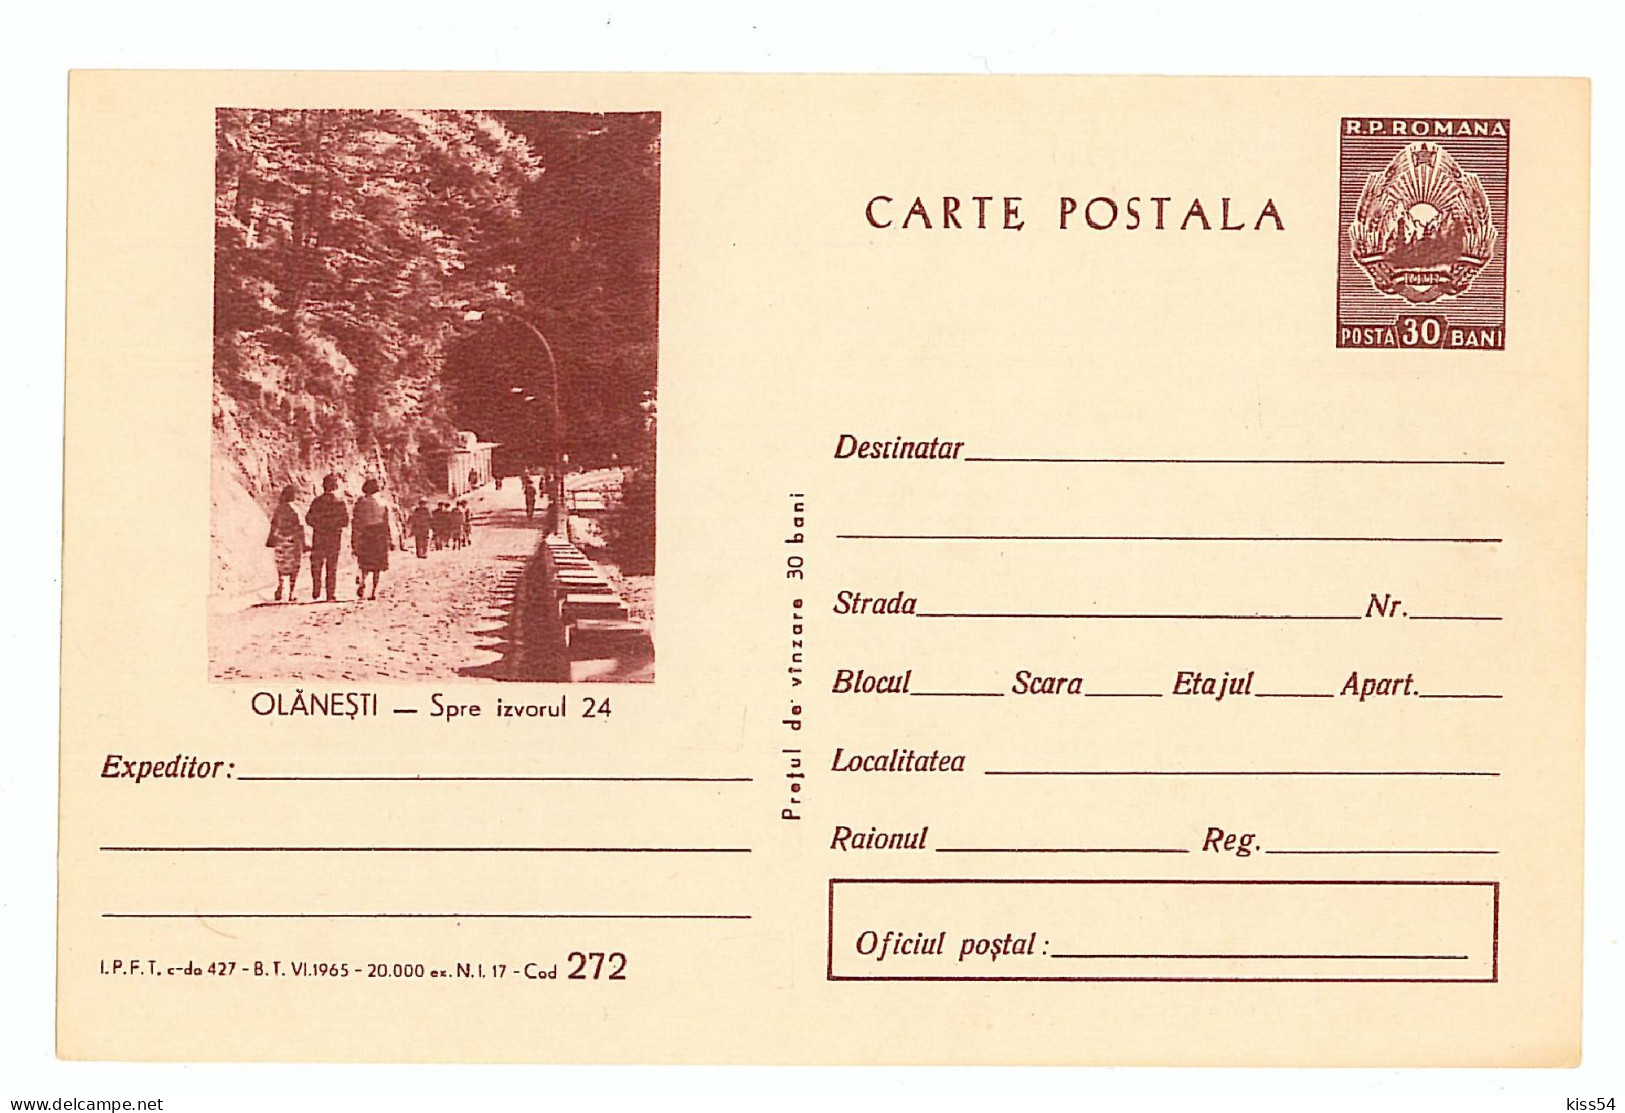 IP 65 A - 272 TOURISM, OLANESTI To The Mineral Springs, Romania - Stationery - Unused - 1965 - Ganzsachen